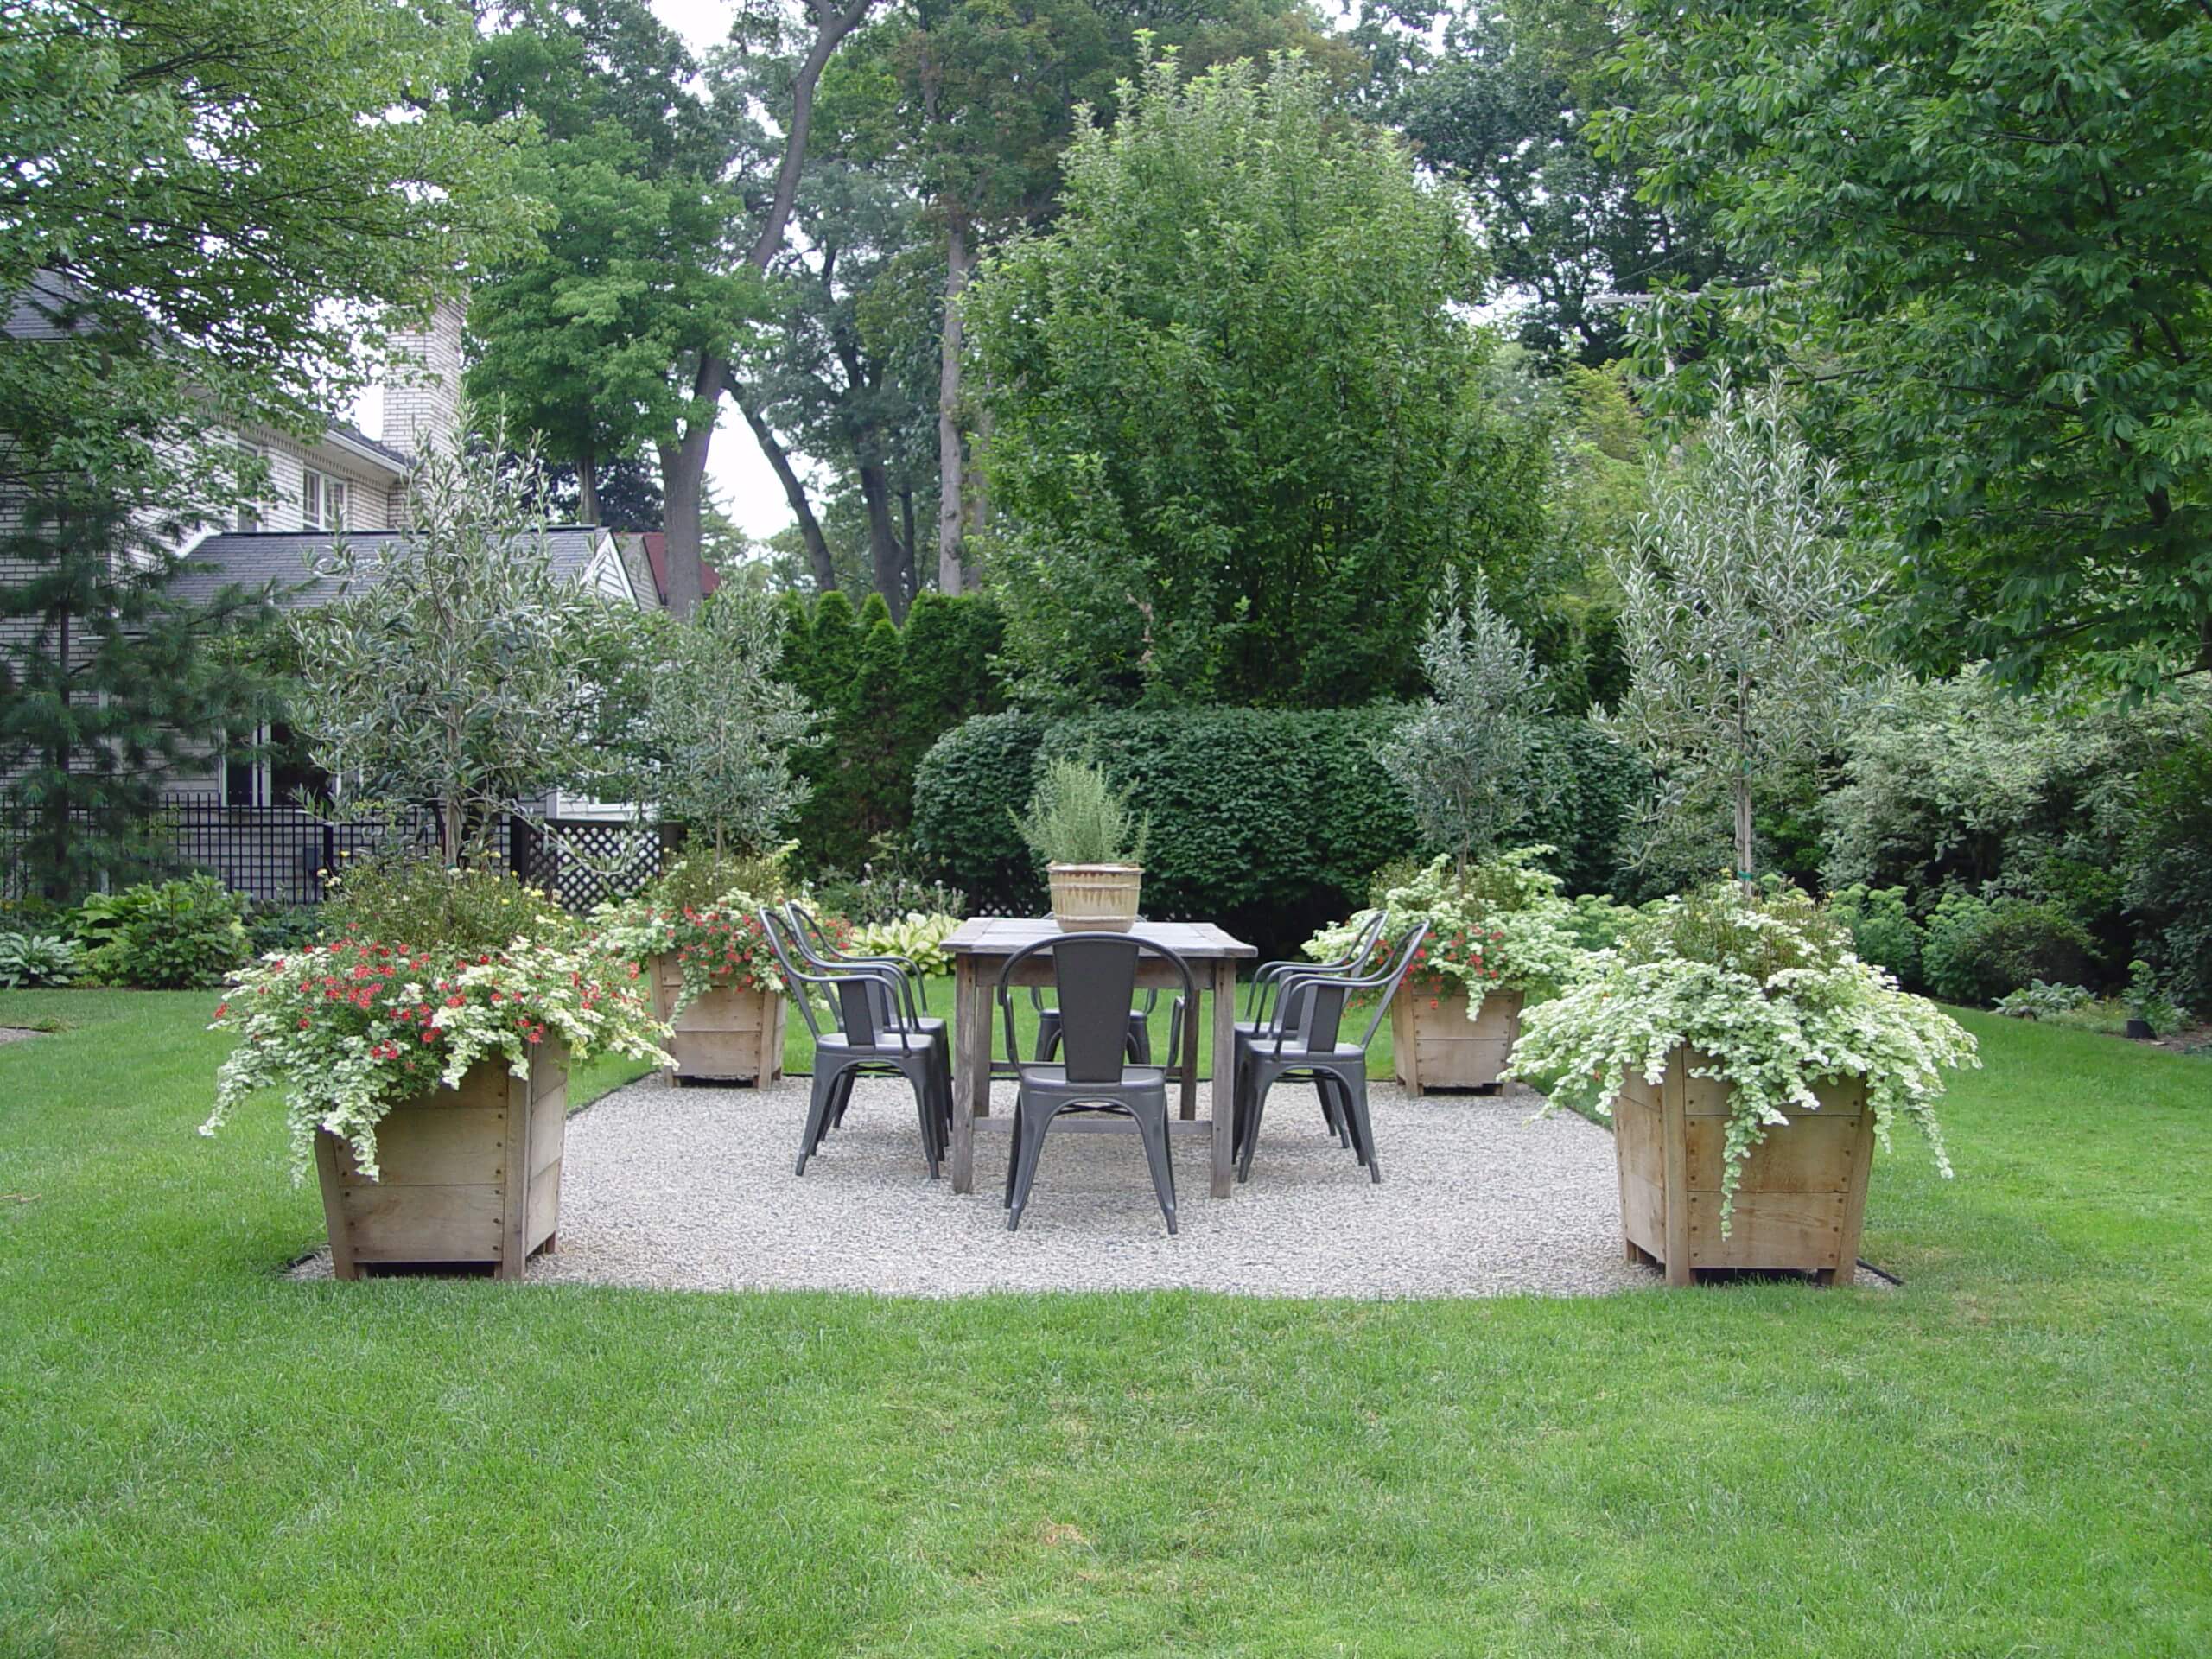 A garden with a table, chairs and potted plants.